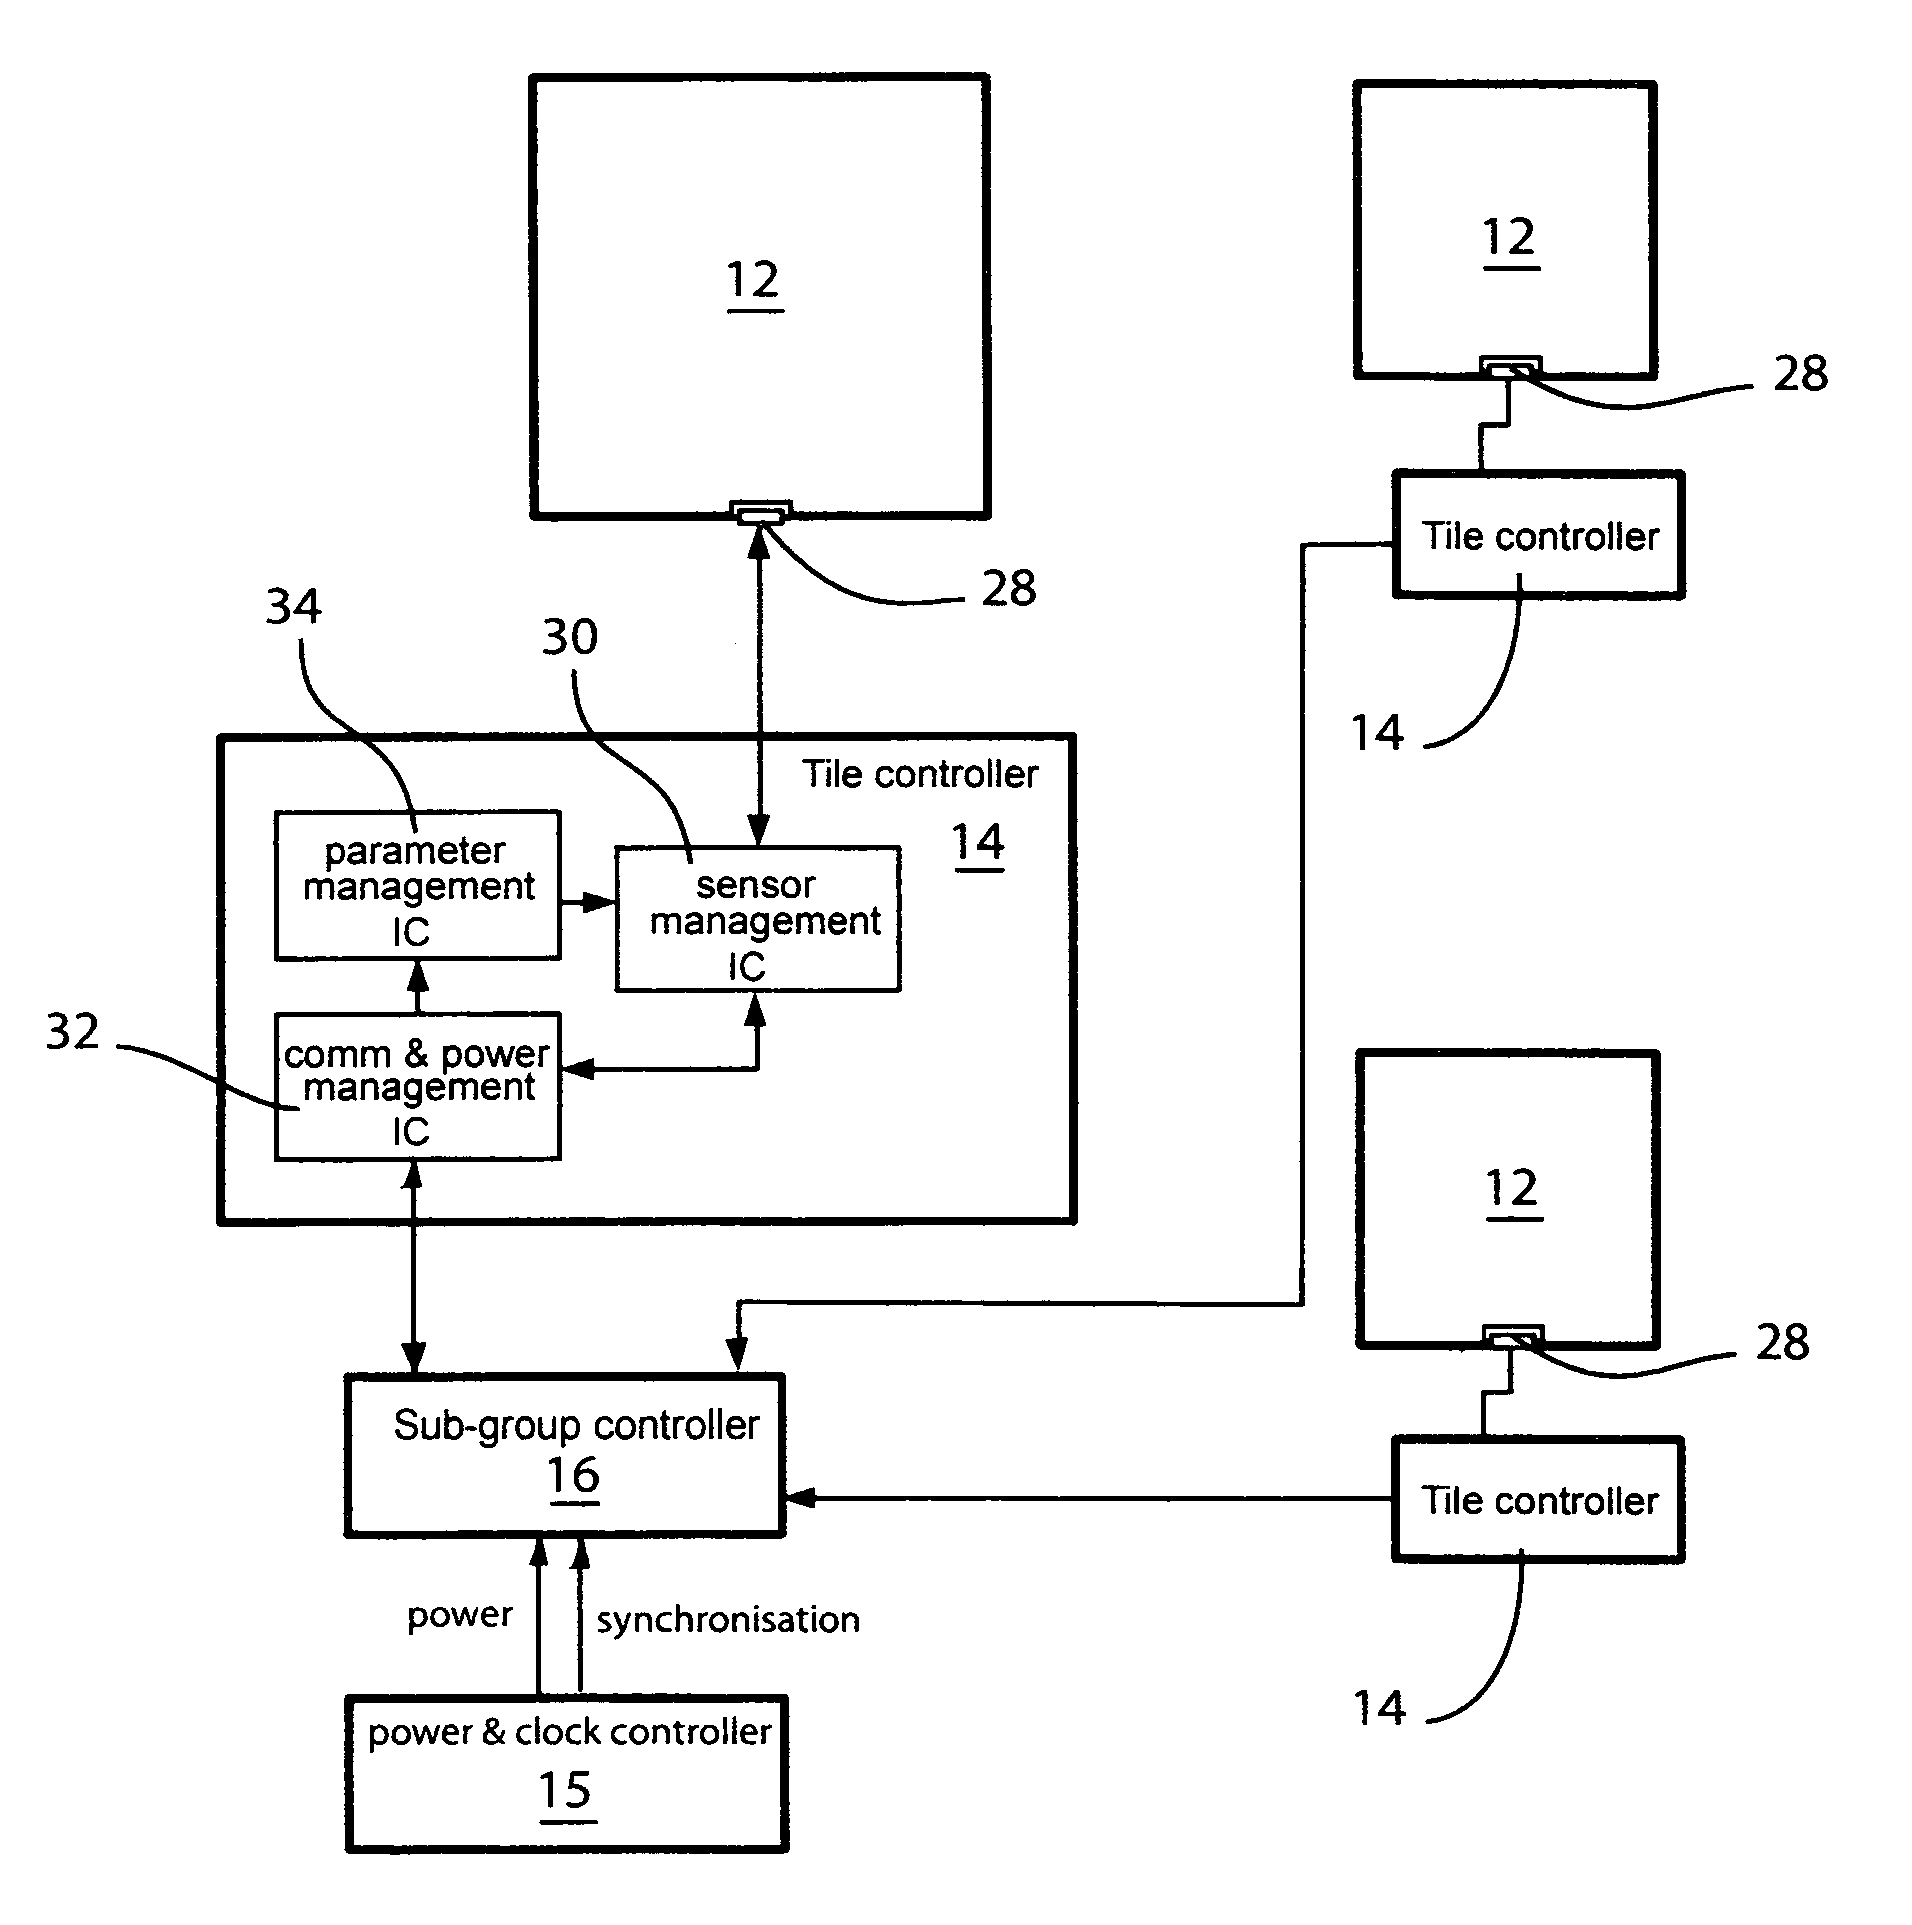 Apparatus, system and methods for collecting position information over a large surface using electrical field sensing devices